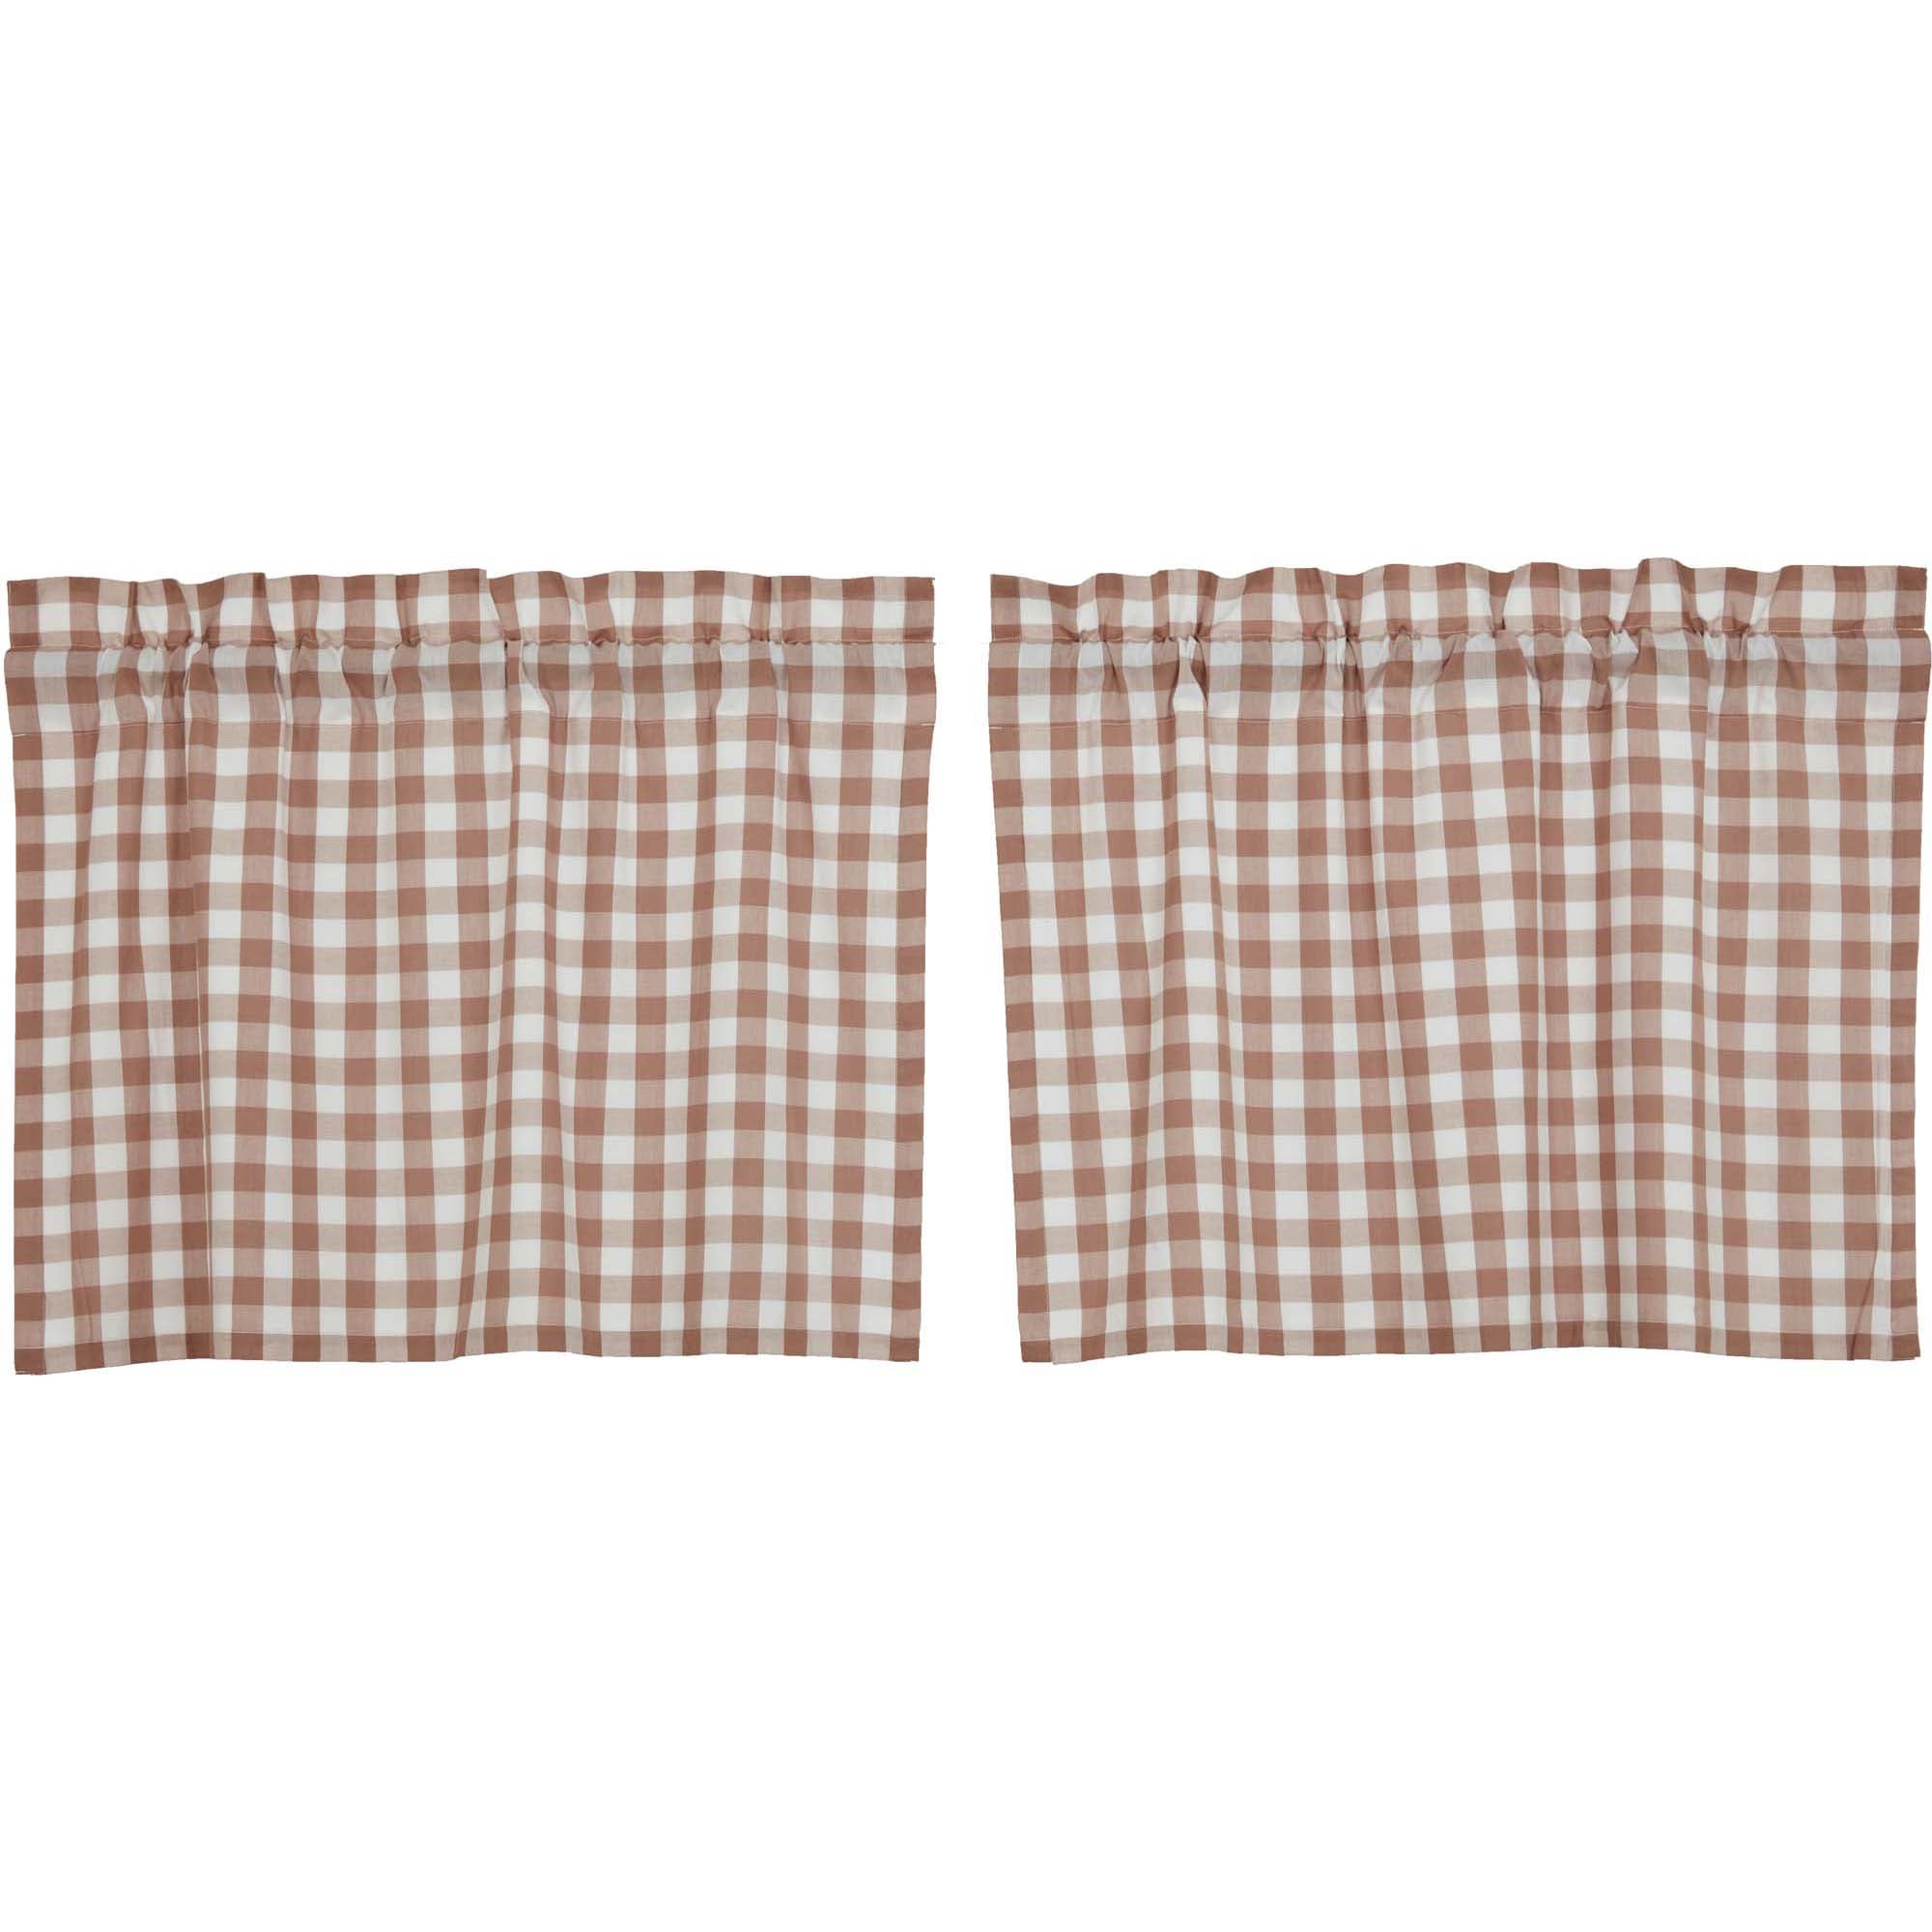 April & Olive Annie Buffalo Portabella Check Tier Set of 2 L24xW36 By VHC Brands